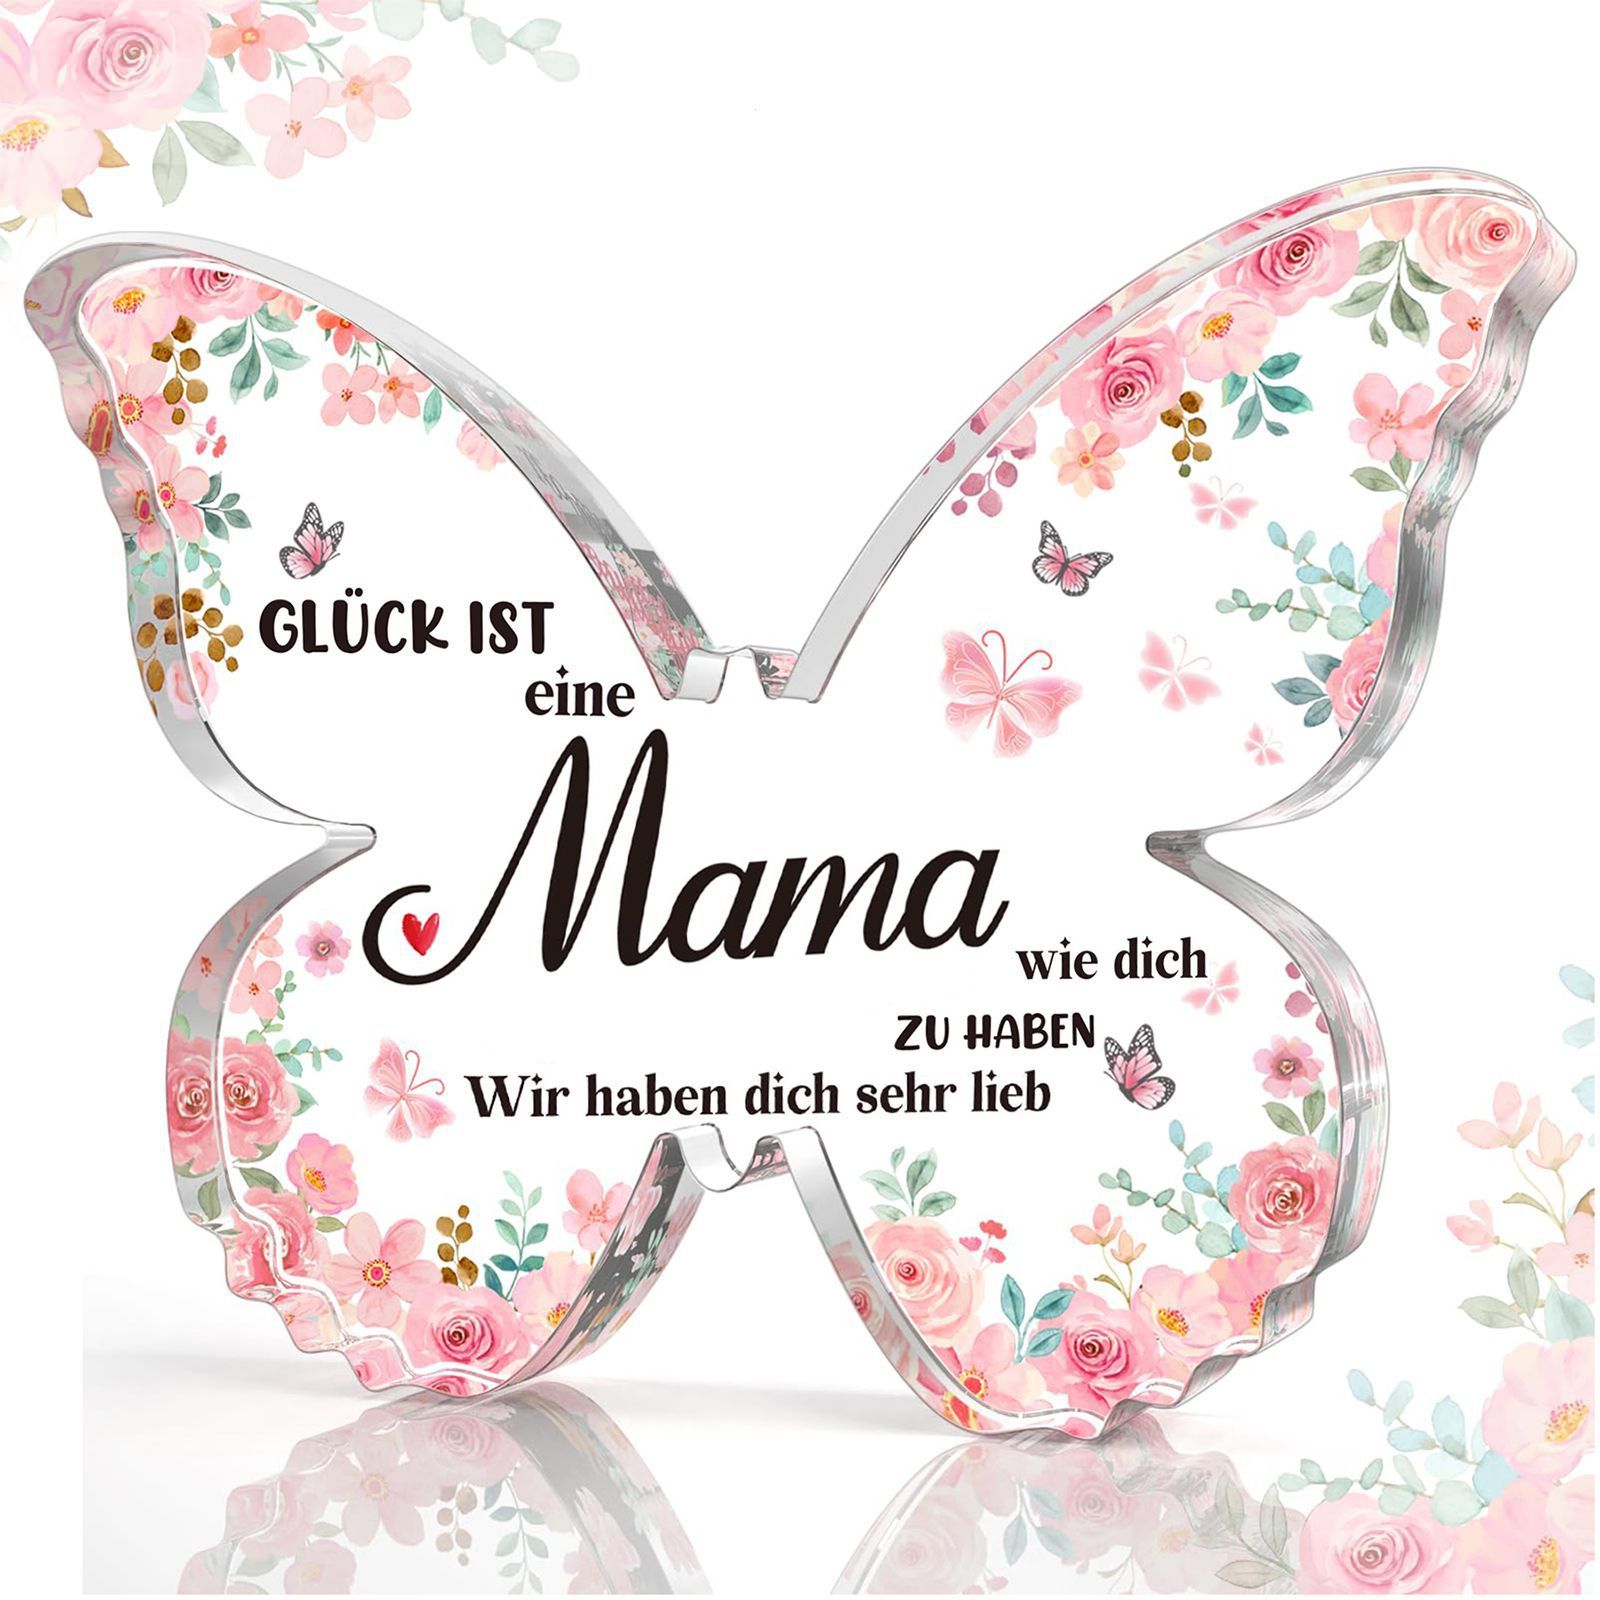 Mother's Day Gifts For Mom Grandma Nana DIY Unique Mom Birthday Gift Ideas Butterfly-Shaped Acrylic Keepsake Gifts For Mothers Day